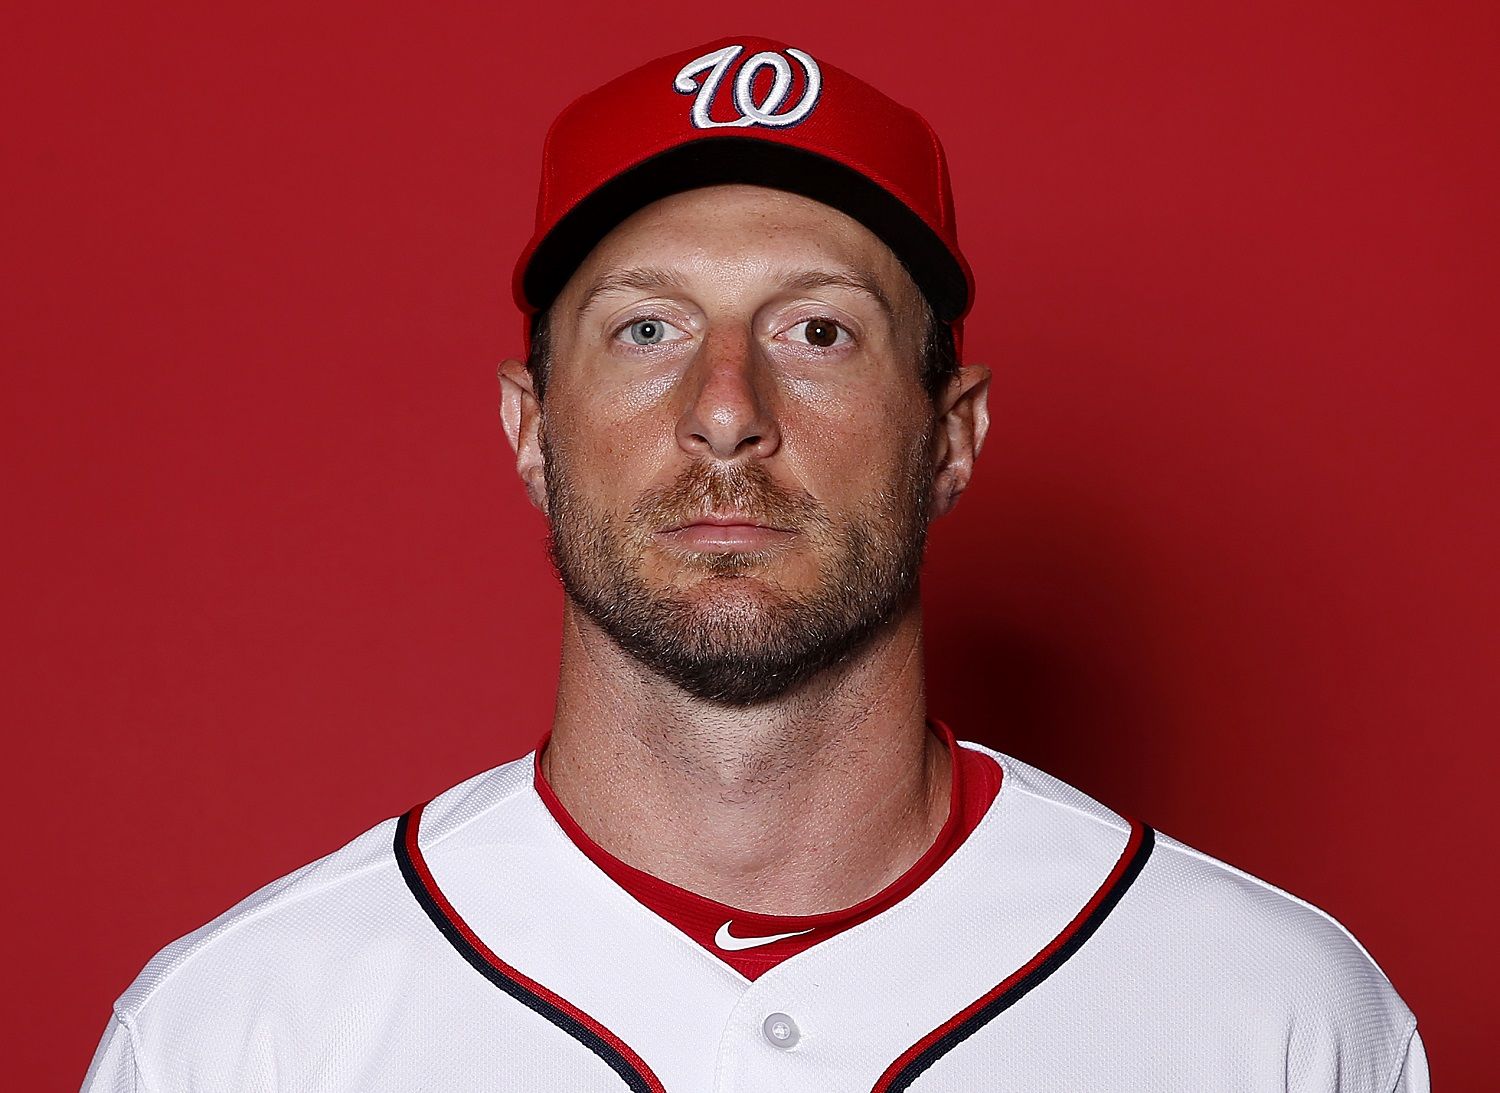 WEST PALM BEACH, FLORIDA - FEBRUARY 22:   Max Scherzer #31 of the Washington Nationals poses for a portrait on Photo Day at FITTEAM Ballpark of The Palm Beaches during on February 22, 2019 in West Palm Beach, Florida. (Photo by Michael Reaves/Getty Images)